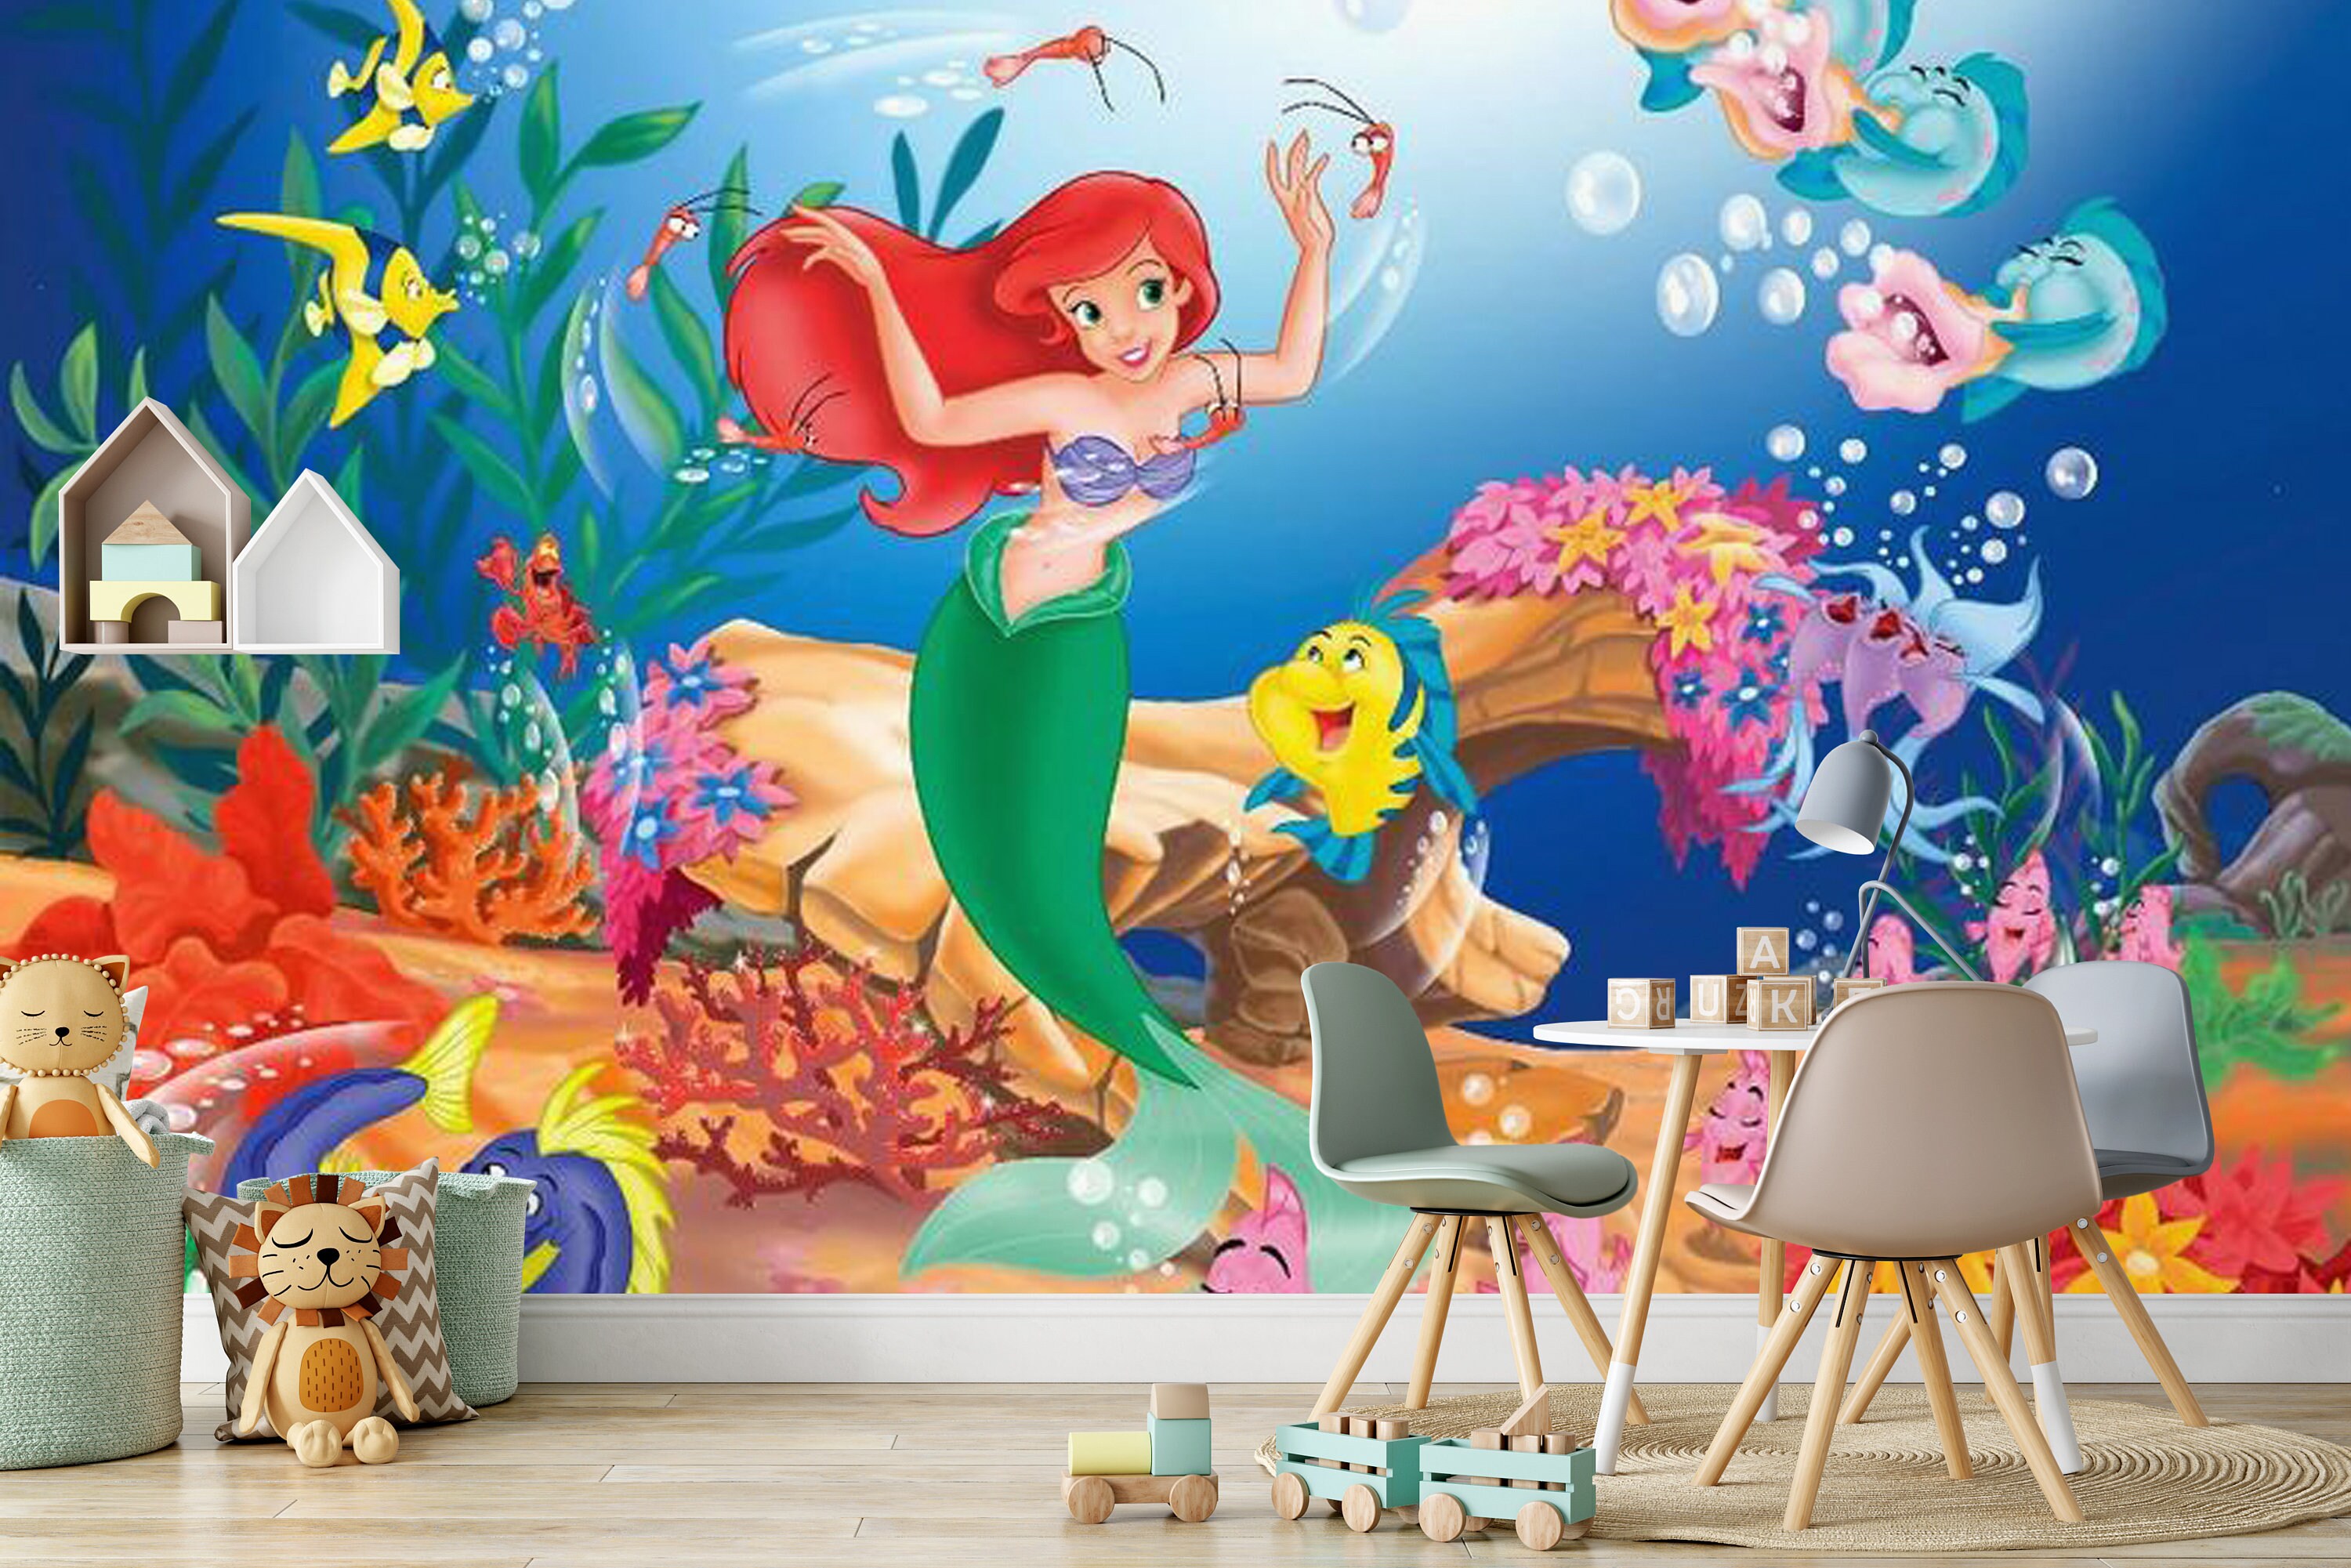 The Little Mermaid 2 Wall Mural The Little Mermaid Wall Etsy Images, Photos, Reviews